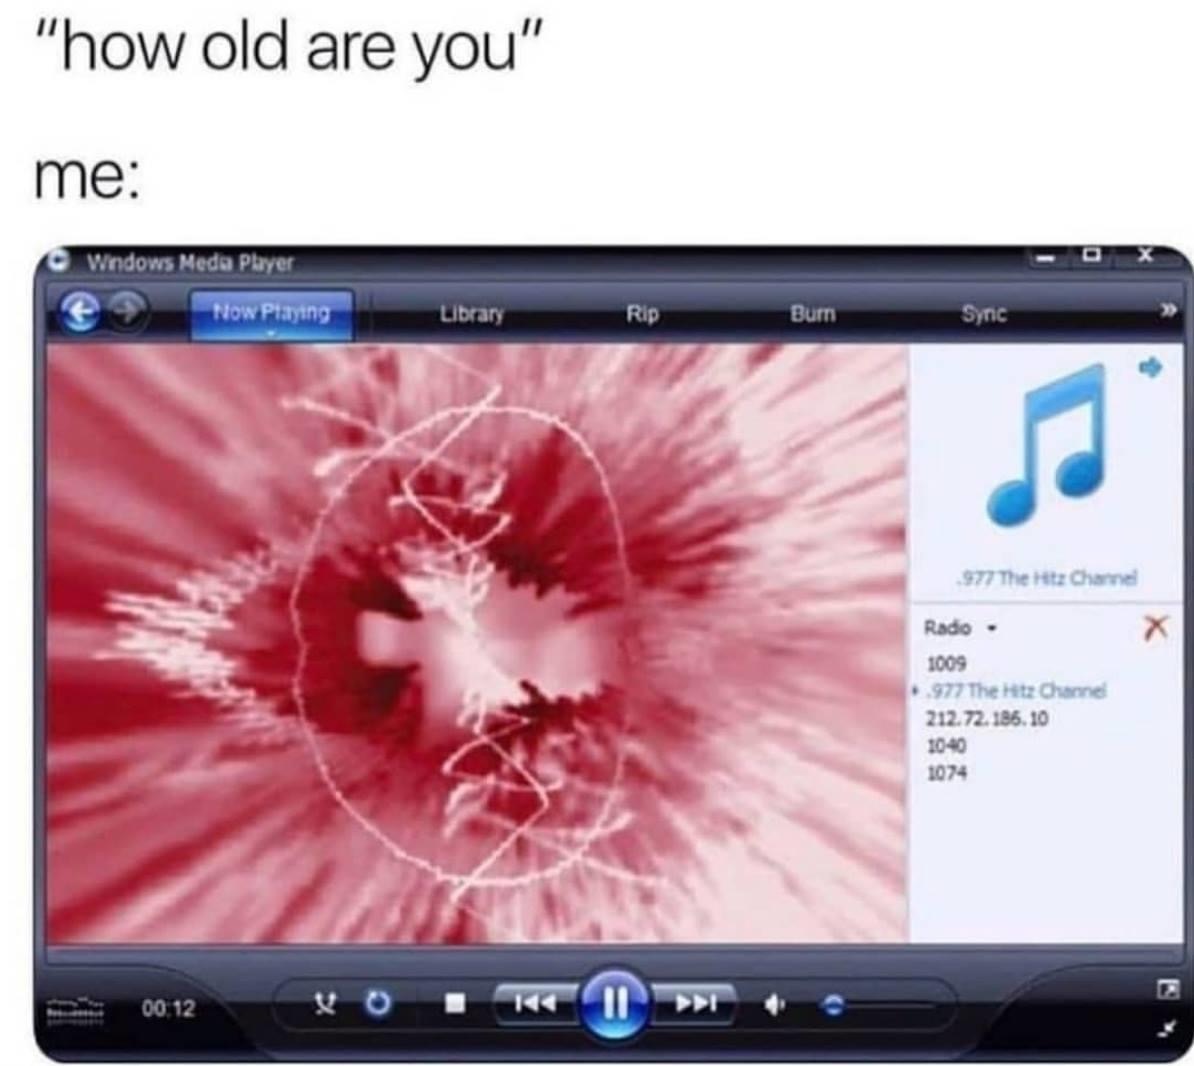 old windows media player - "how old are you" me Wndows Media Player Now Playing Library Rip Bum Sync 977 The Hit Channel Radio 1009 977 The Hitz Channel 212.72.186.10 1040 1074 00. 120 11M